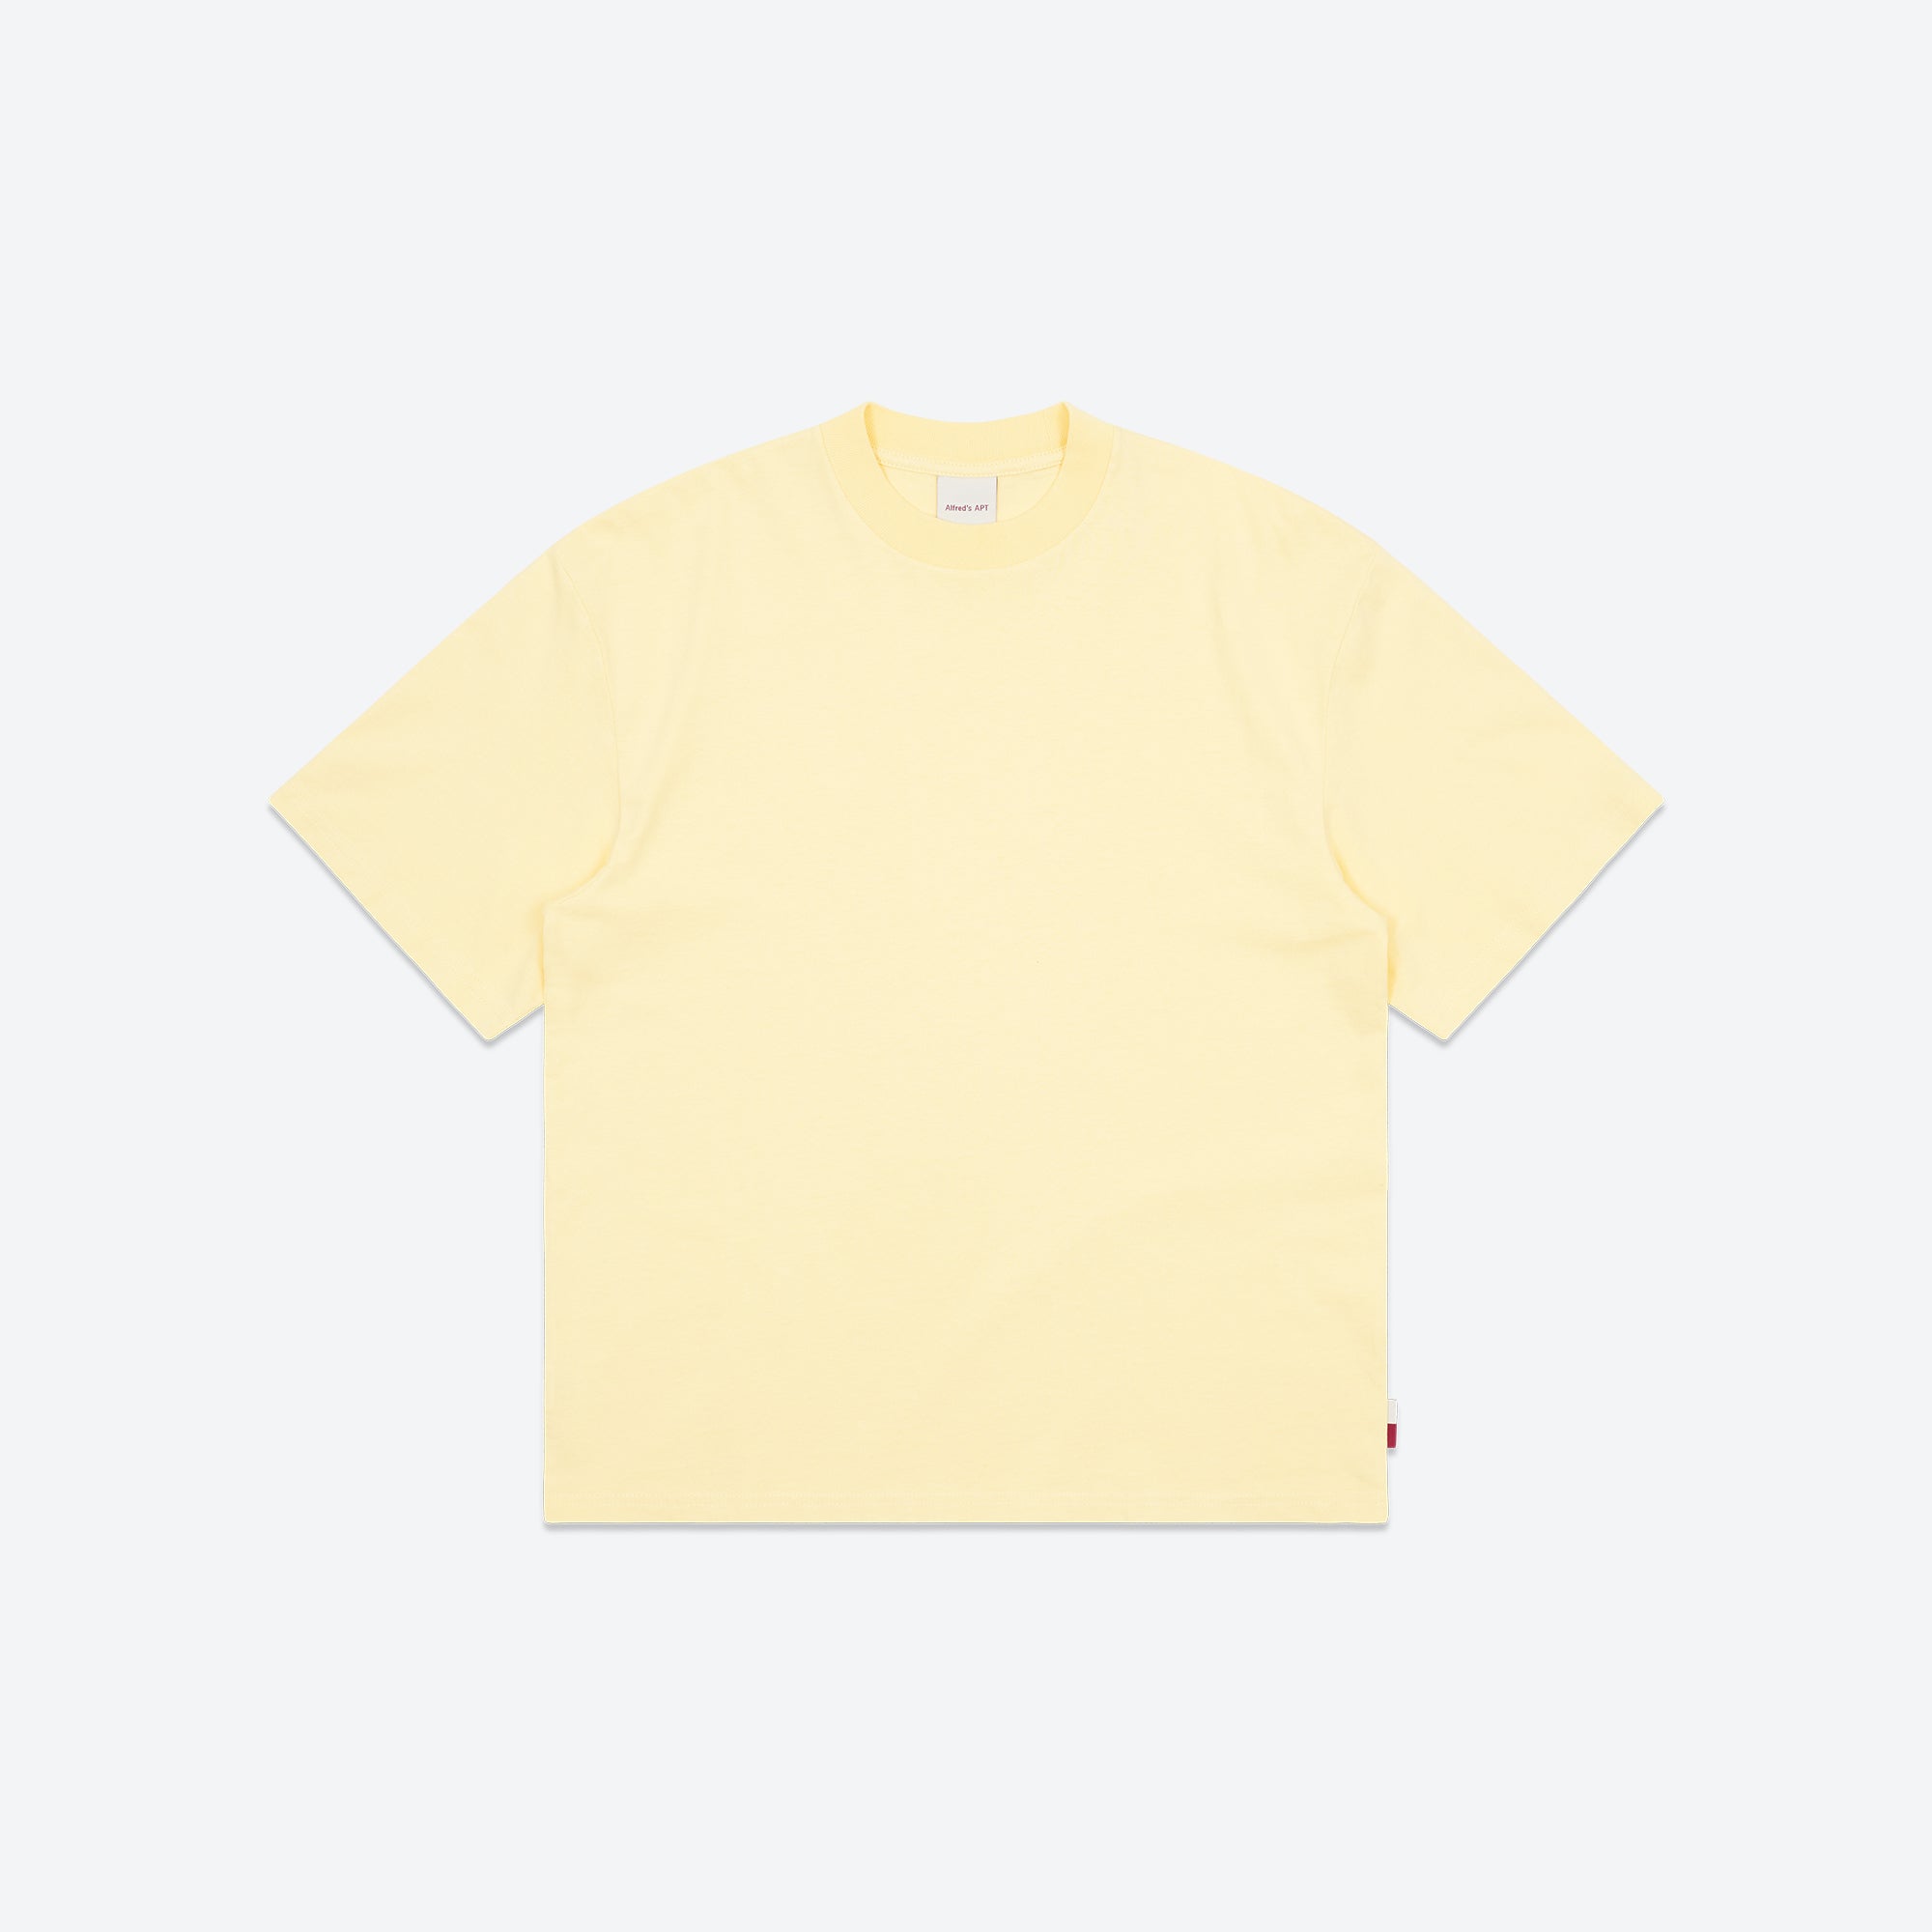 Alfred's Apartment - Trusted Tee - Washed Yellow